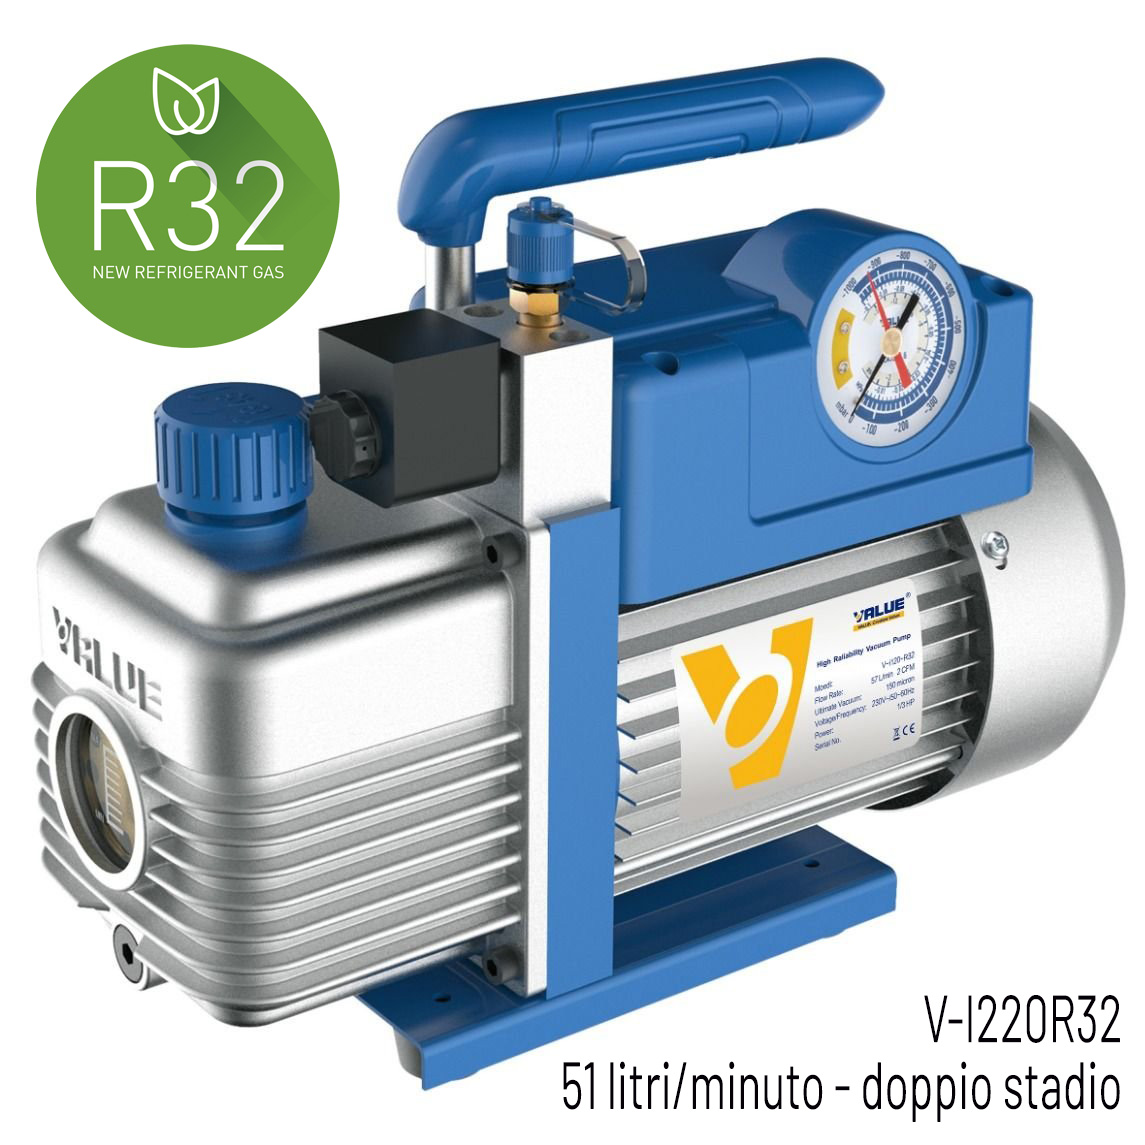 VALUE Vacuum pump, double stage, suitable for A2L, flow rate 51 litri/minute, motor 1/3 HP, vacuum rate  2 x10(-2) mbar - 0,02 mbar/2 Pa/15 micron - with solenoid valve and vacuum gauge